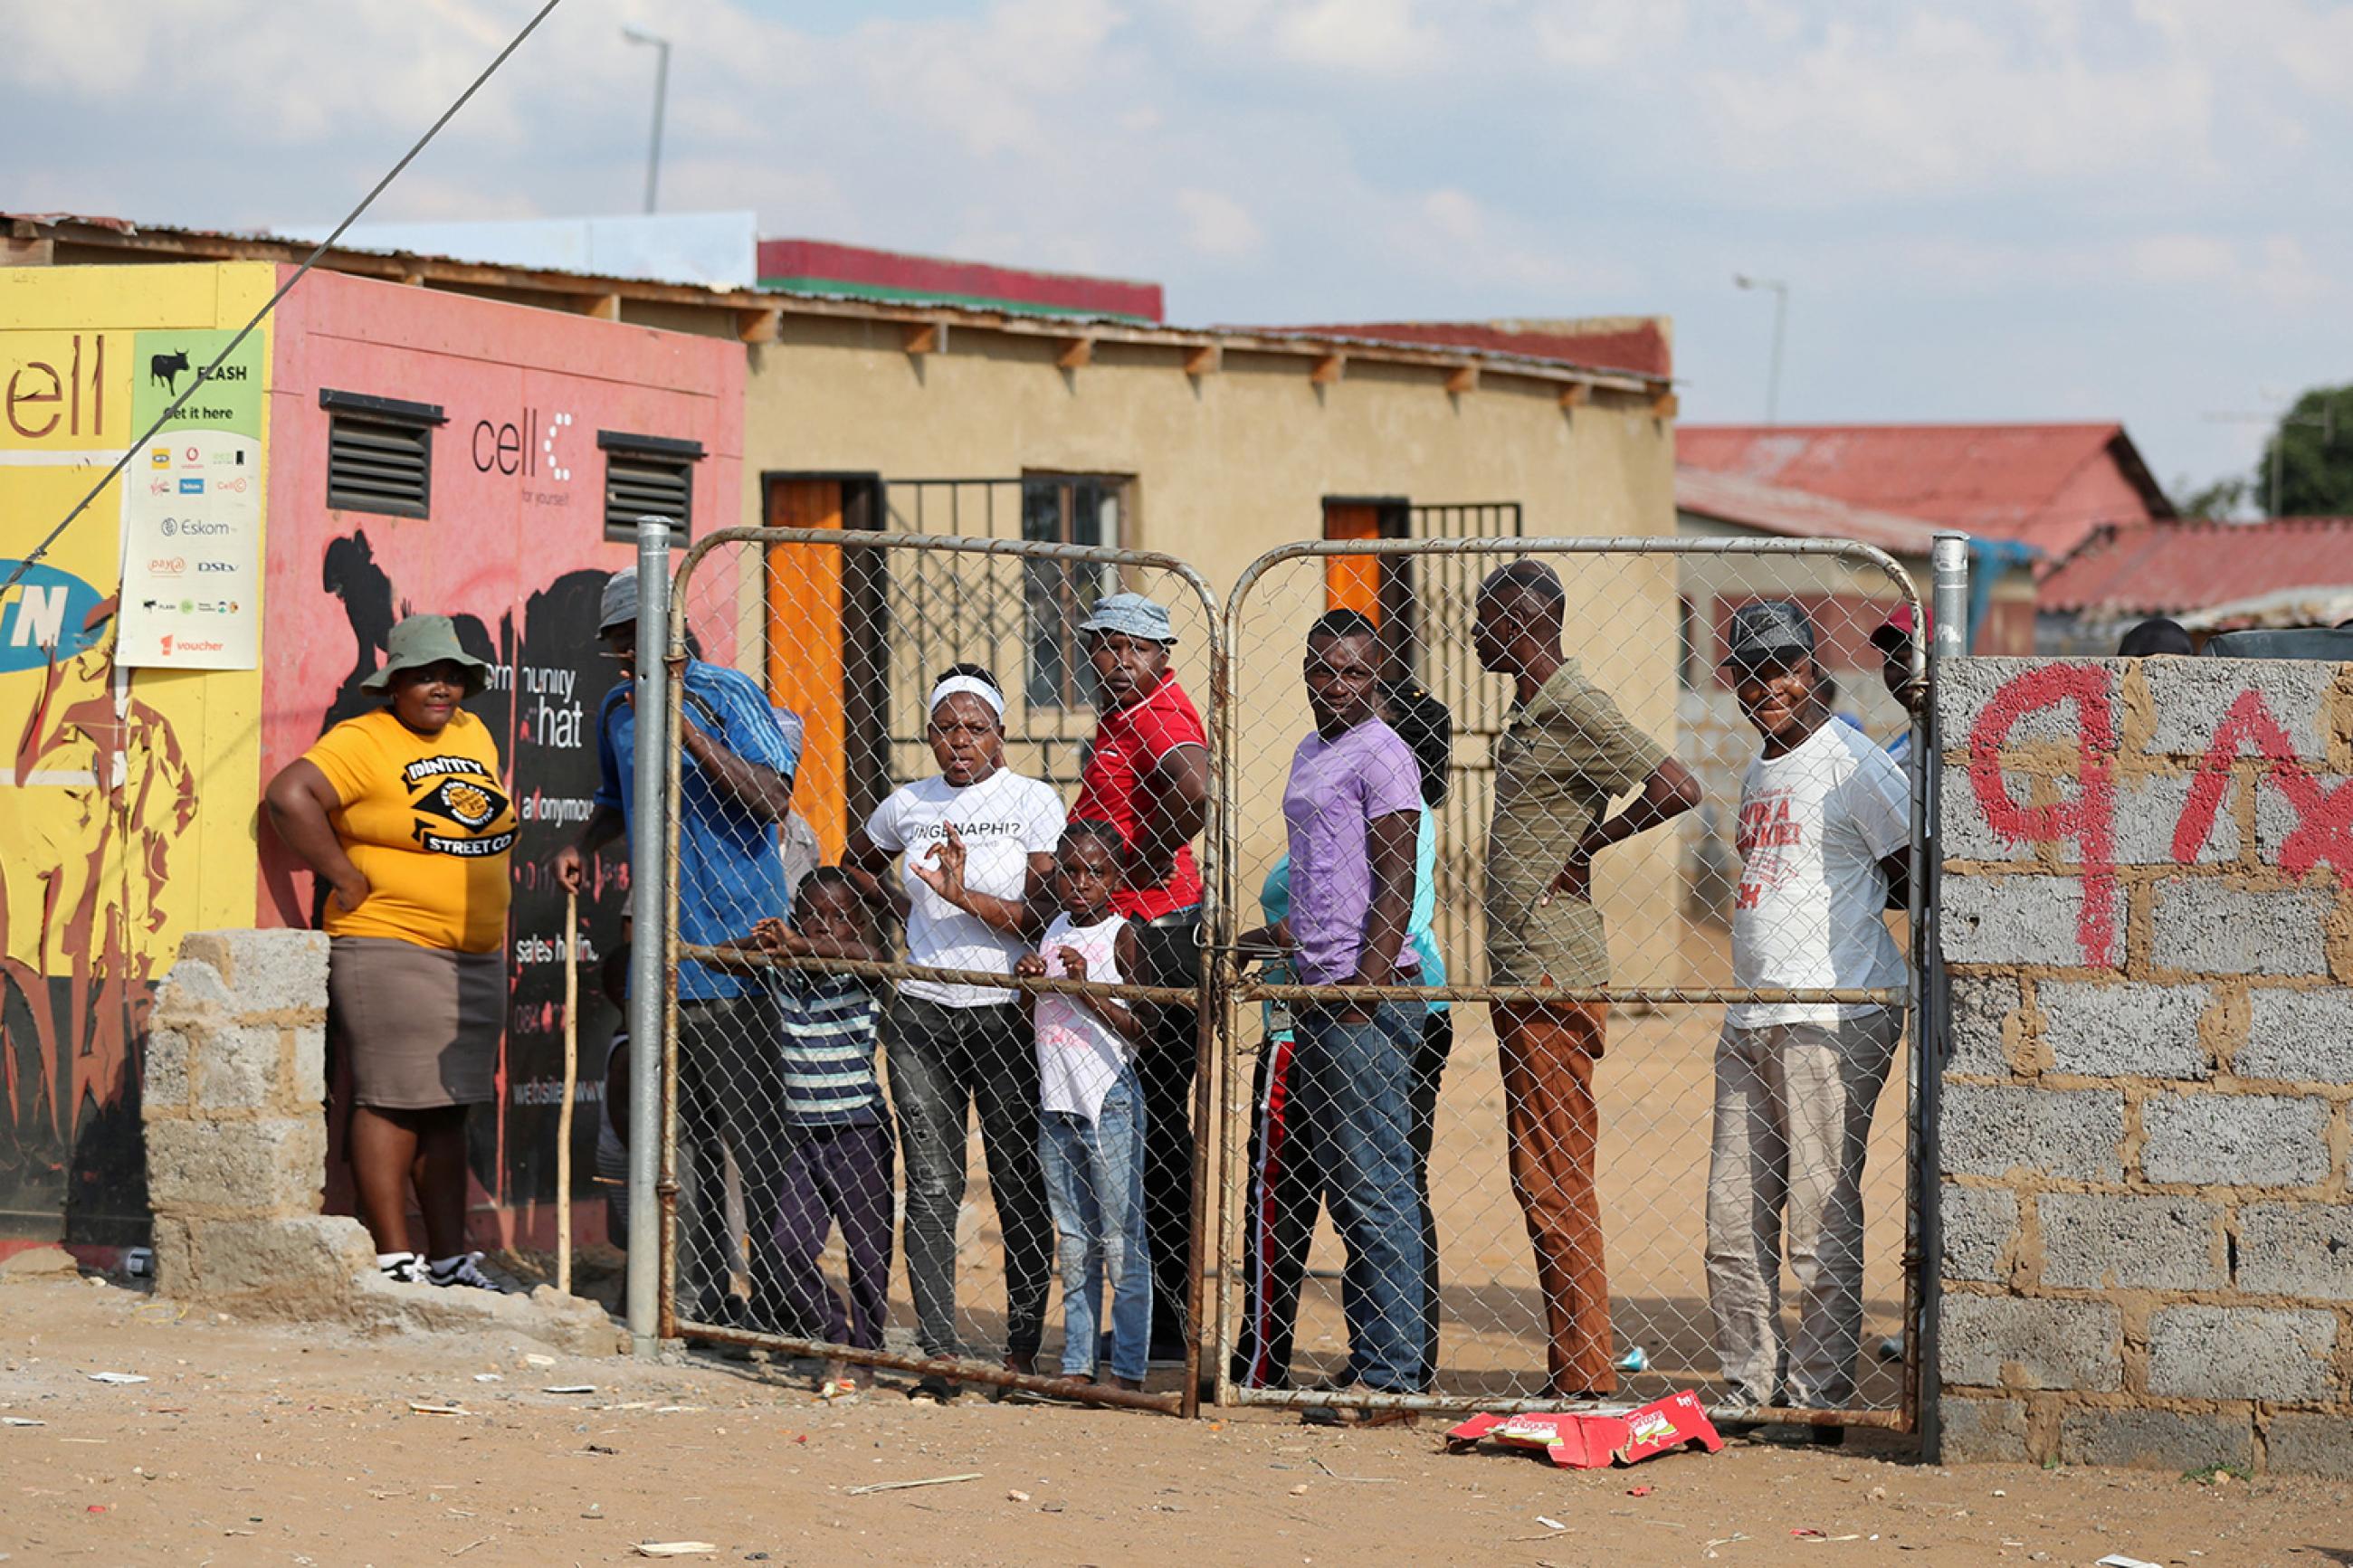 Residents look from behind a closed gate as members of the military patrol during a nationwide lockdown aimed at limiting the spread of novel coronavirus—in Soweto, South Africa on April 23, 2020. The photo shows several people congregated behind a closed fence though there is a very large gap between the fence and the adjacent wall. REUTERS/Siphiwe Sibeko 